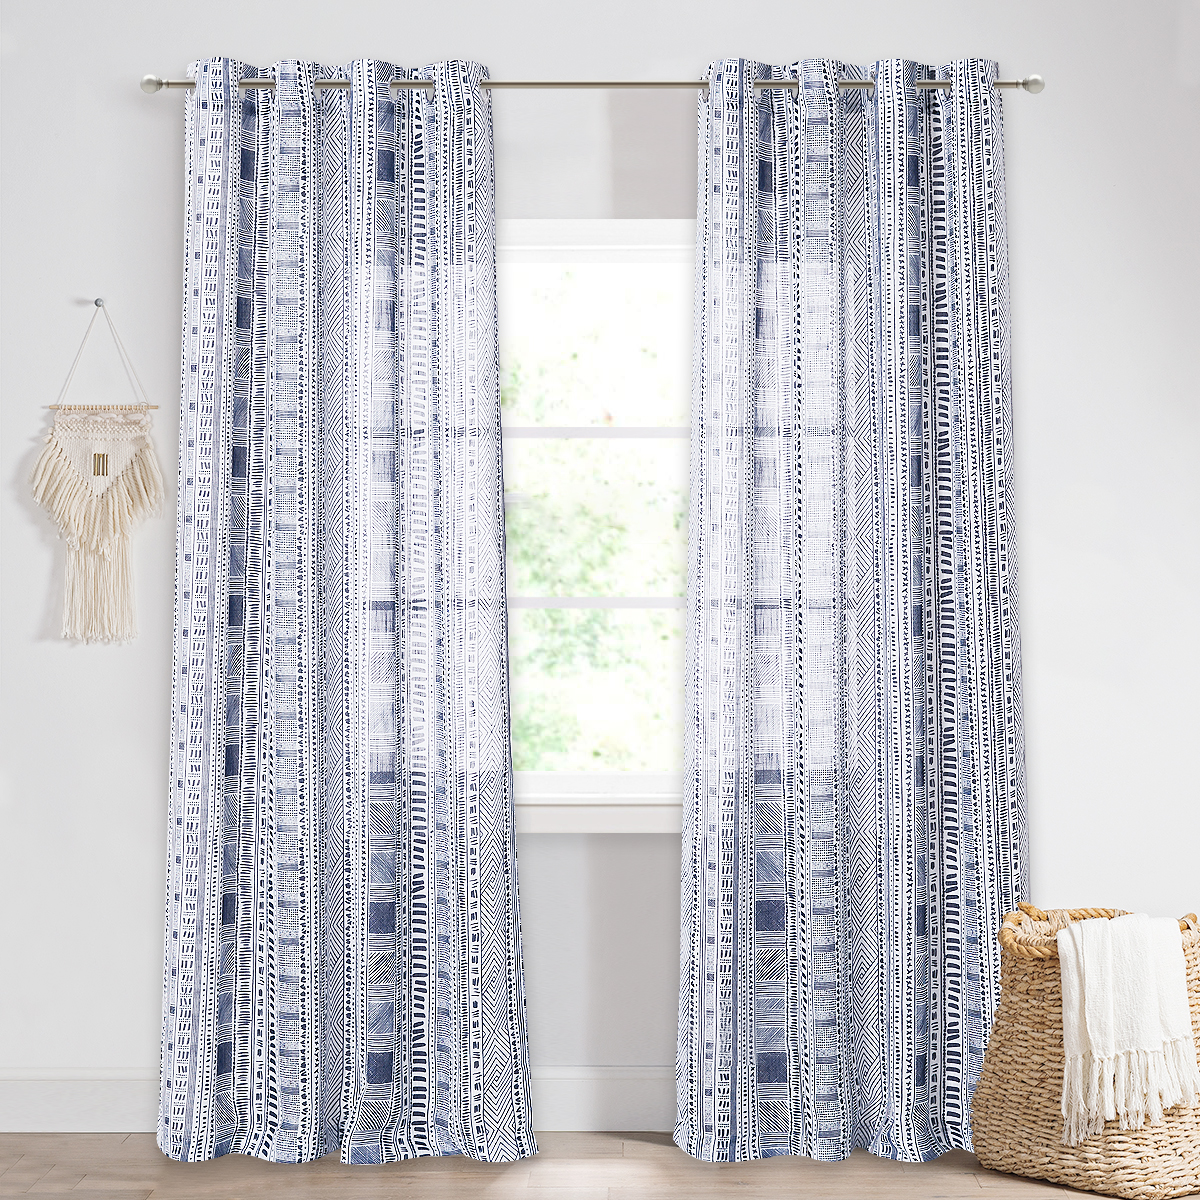 Bohemia Linen Textured Sheer Curtain,sold As 1 Panel